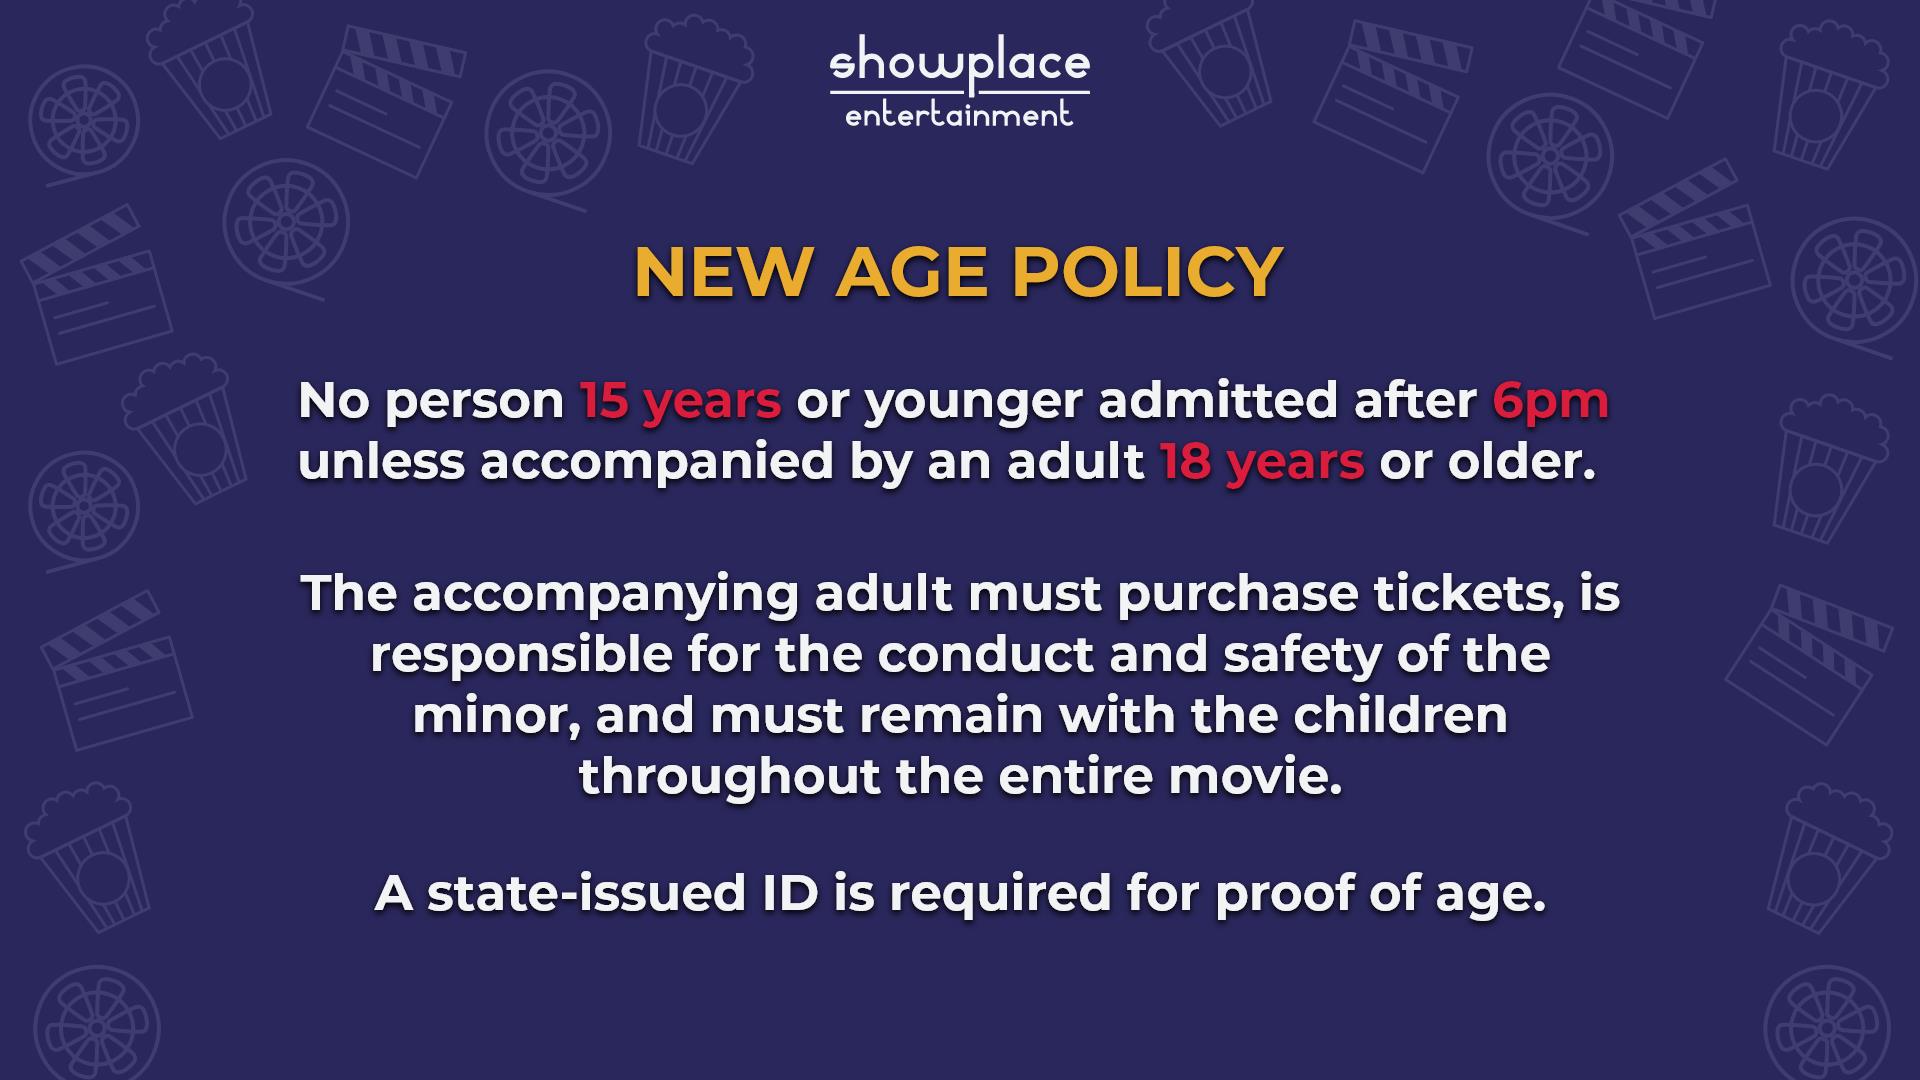 New Age Policy image